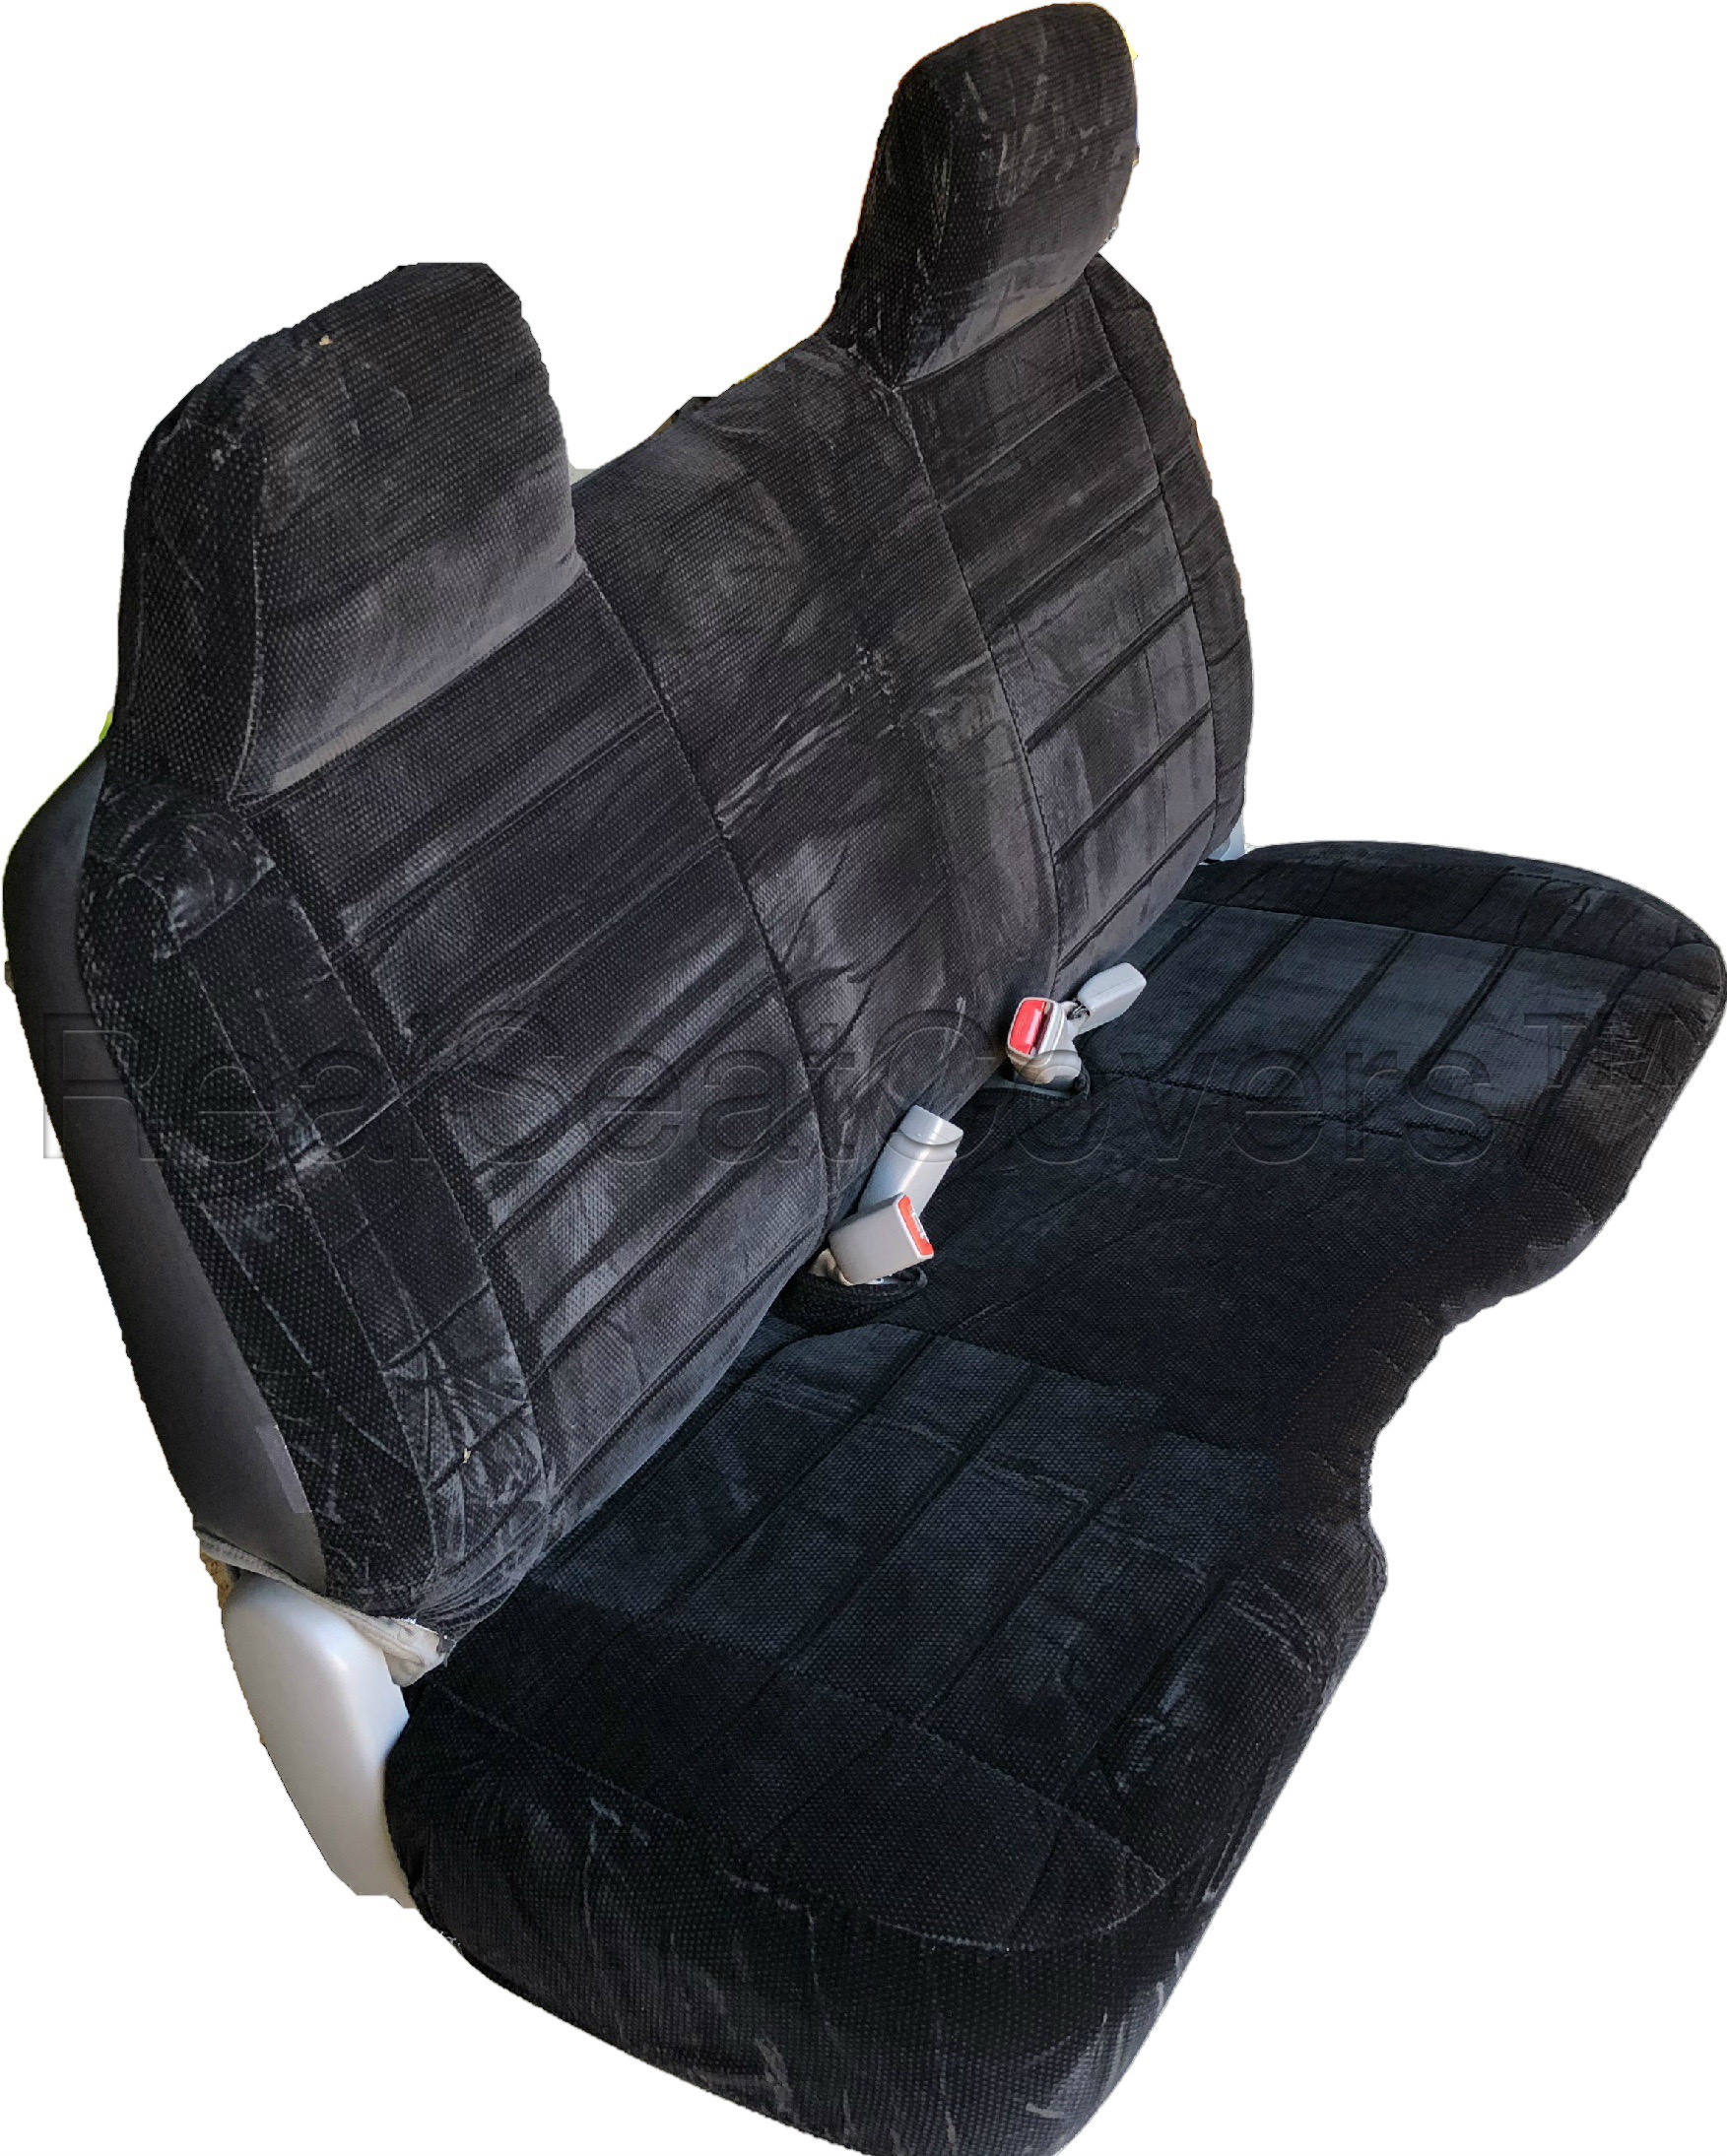 Seat Cover for Toyota Pickup 1984 - 1989 Front Solid Bench A25 Molded Headrest Small Notched Cushion (Black) - image 1 of 4